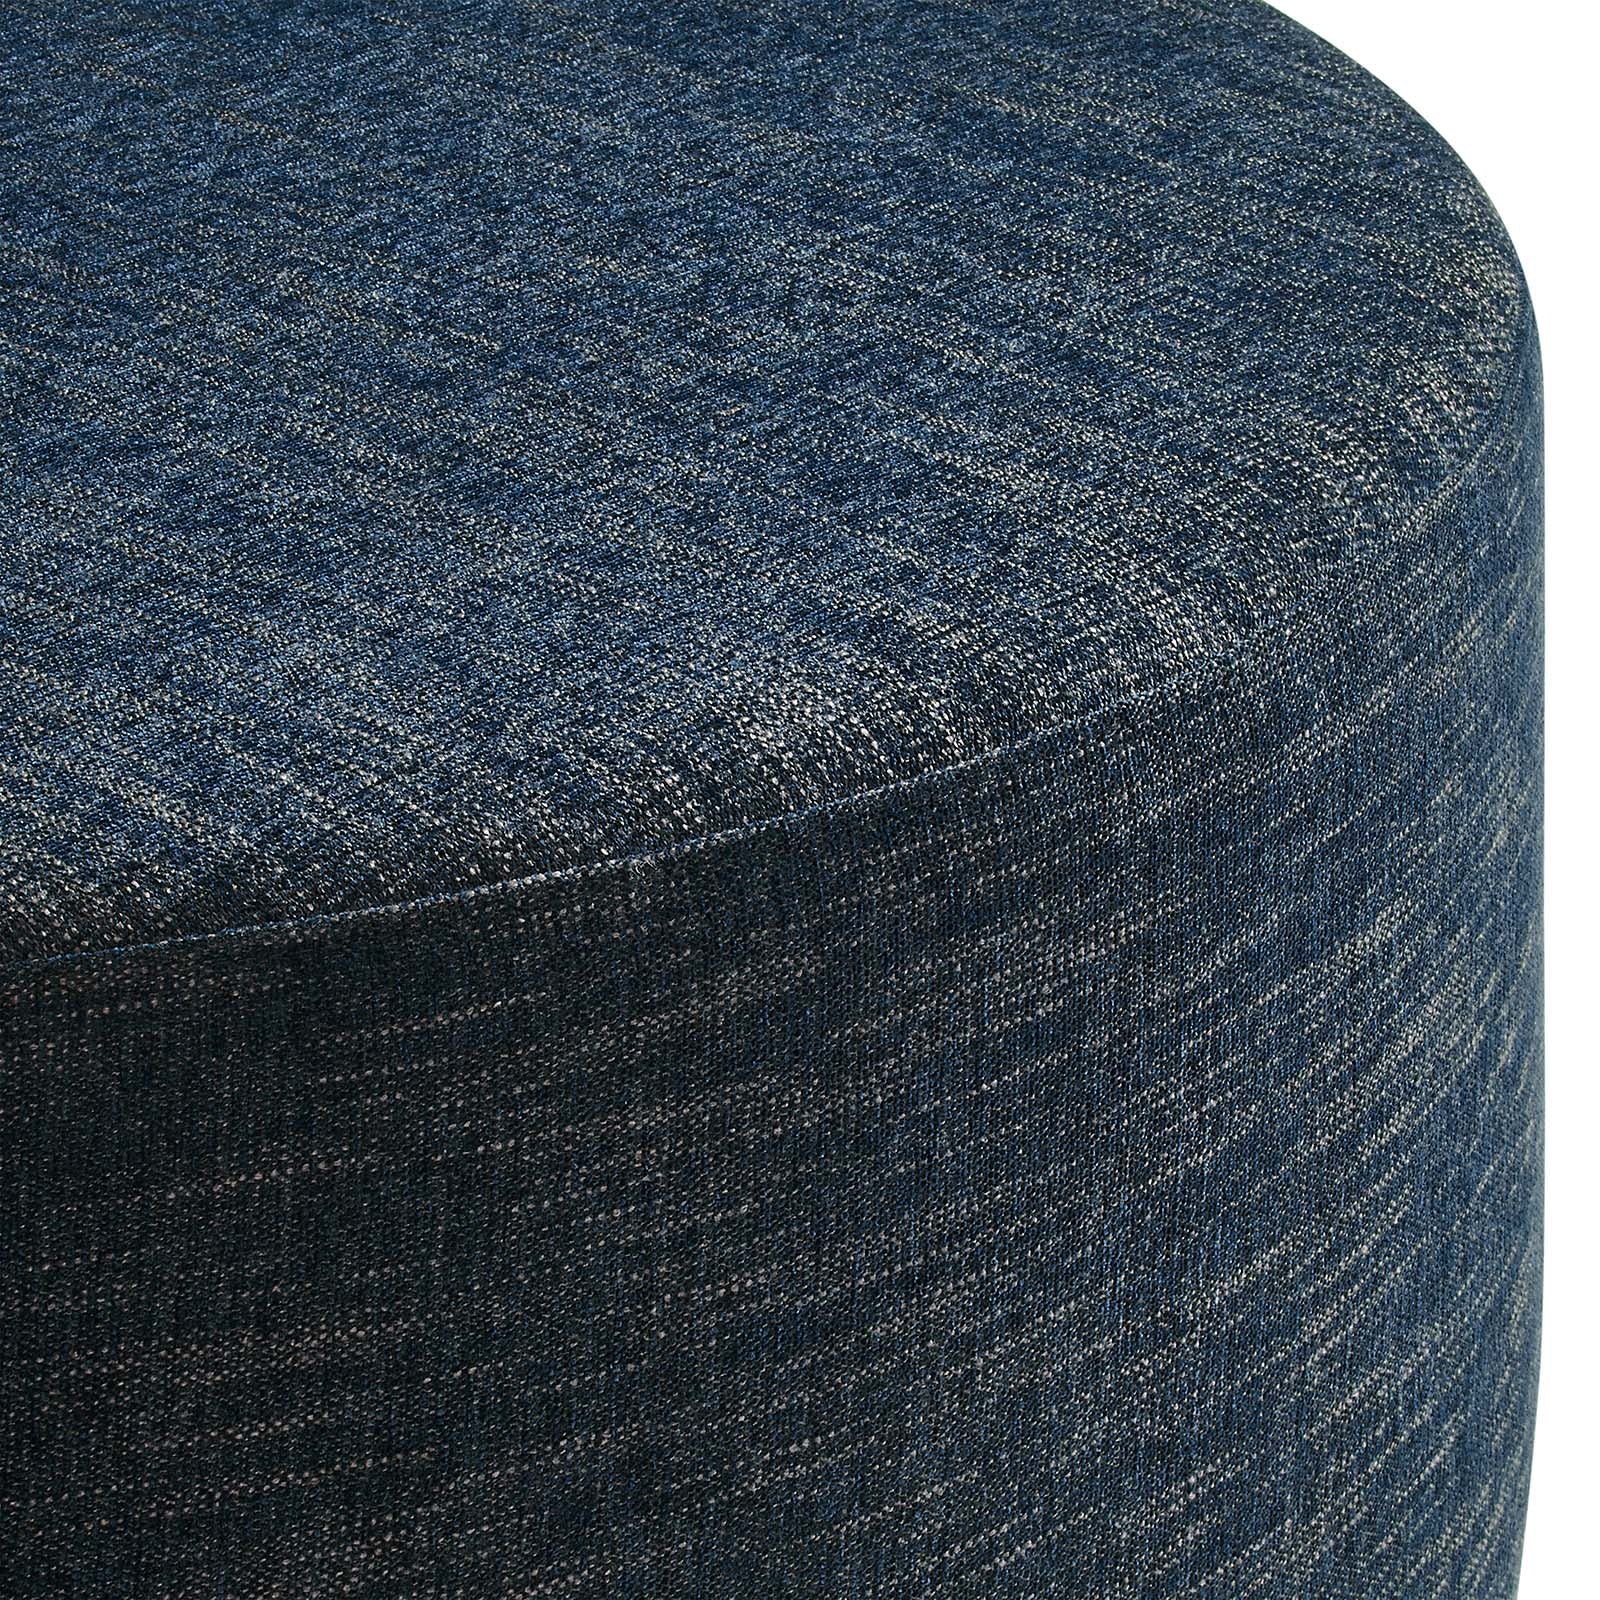 Callum Large 38" Round Woven Heathered Fabric Upholstered Ottoman - East Shore Modern Home Furnishings